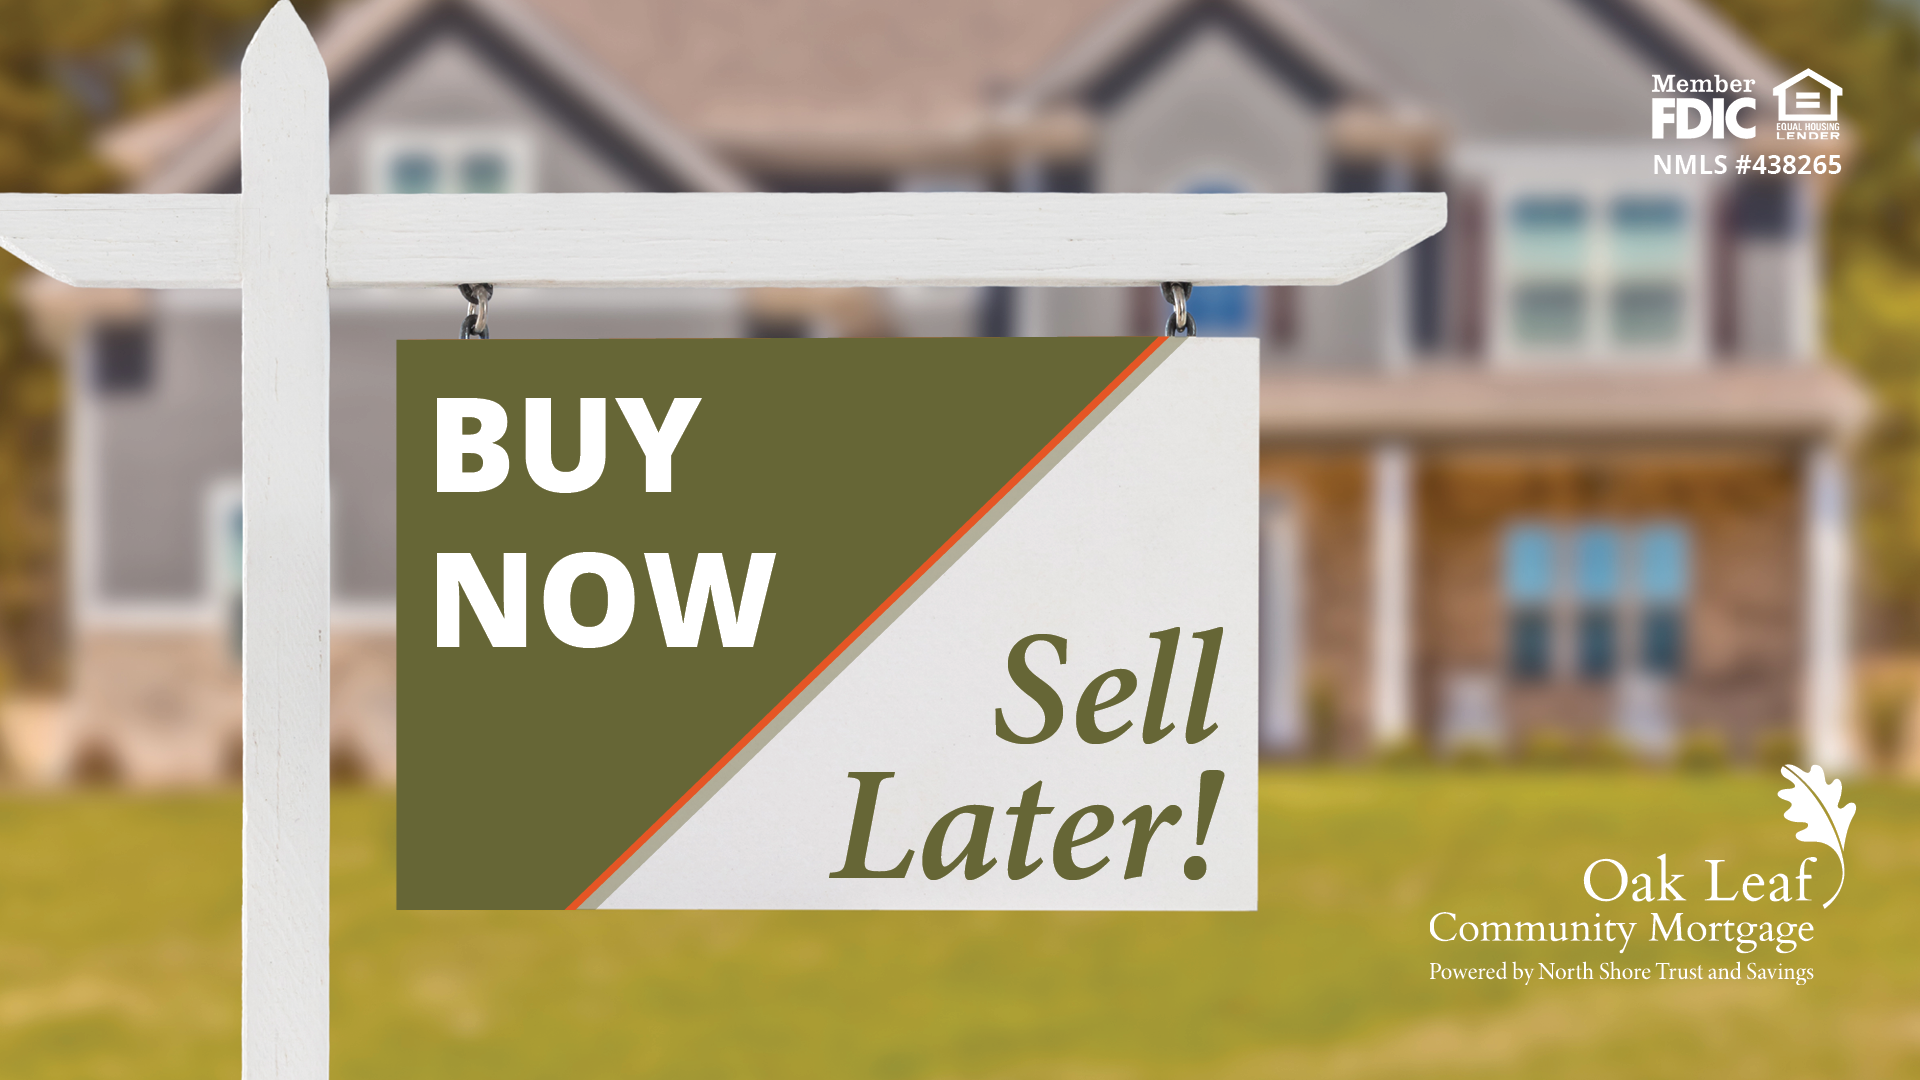 Navigating the Real Estate Transition with Ease: Discover the “Buy Now, Sell Later” Loan Program